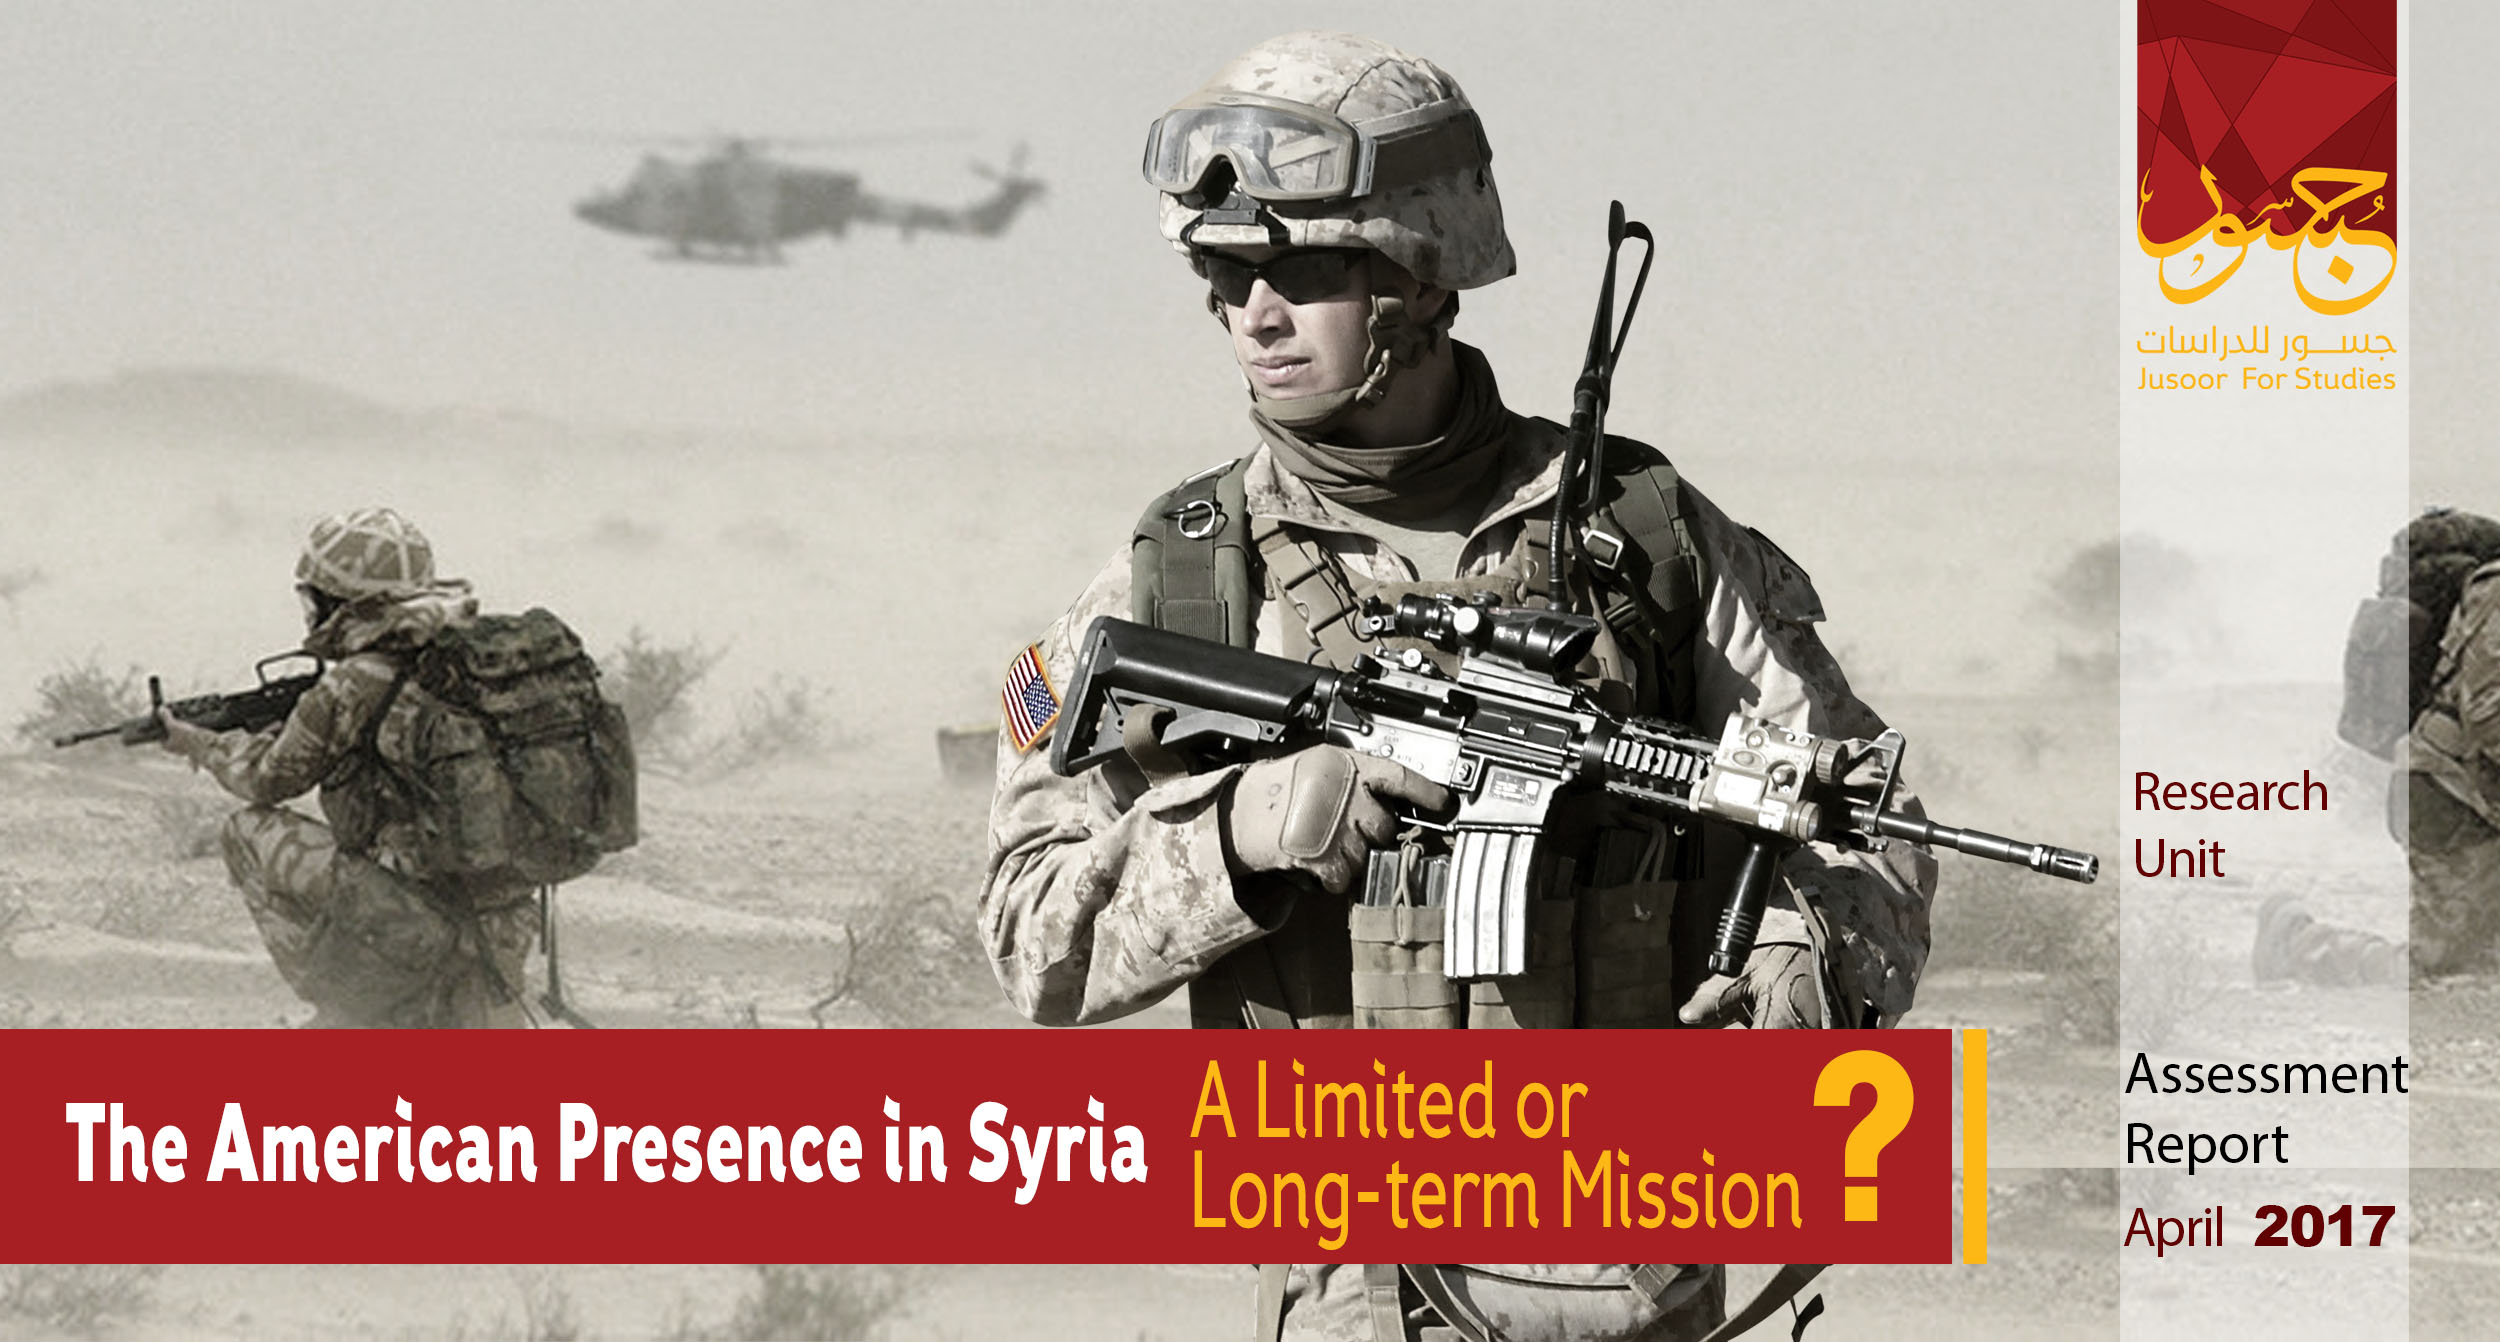 The American Presence in Syria: Limited or Long-term Mission?